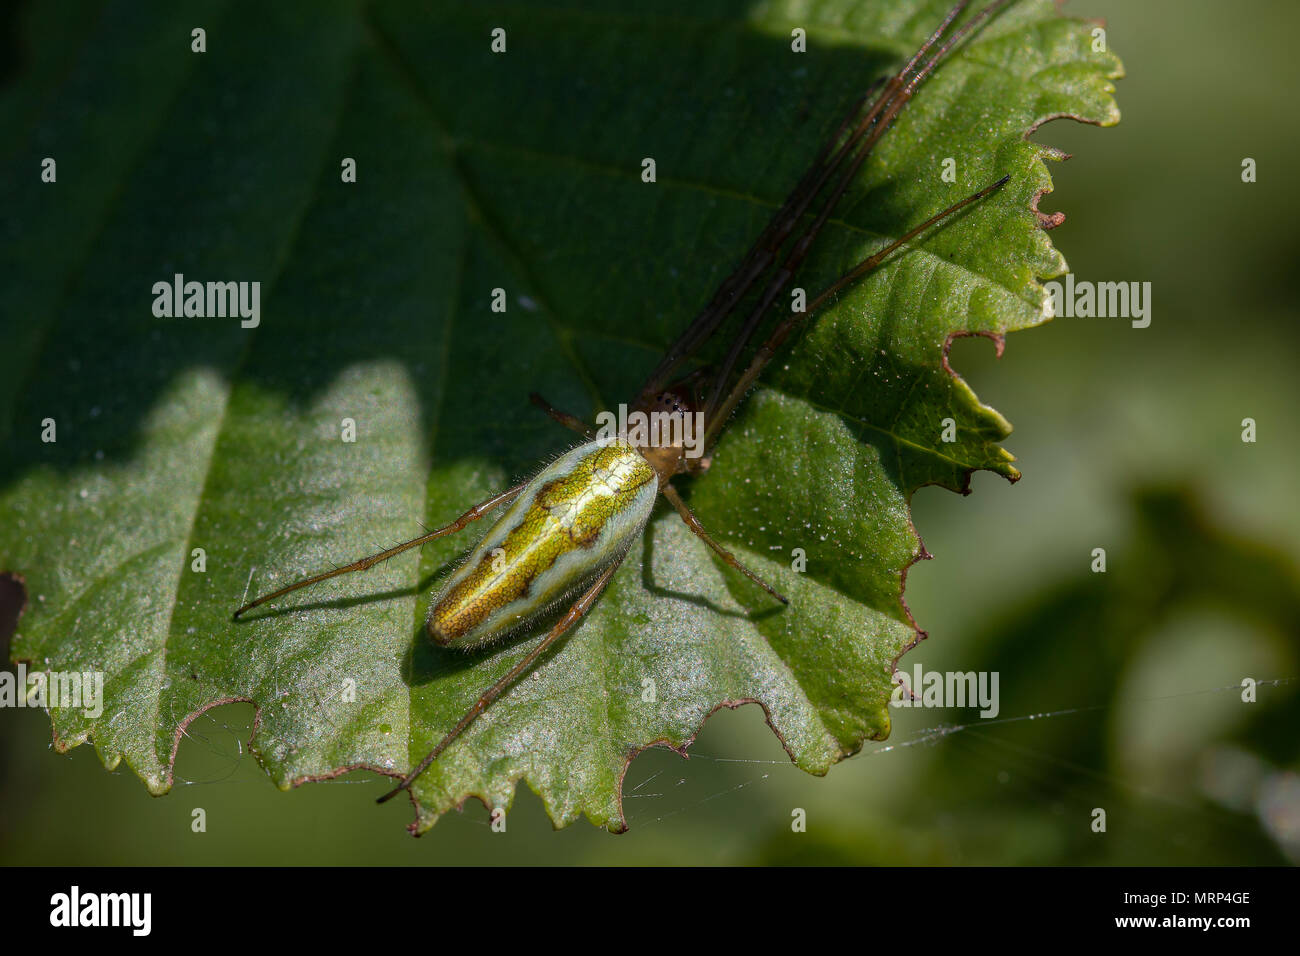 common stretch spider, long-jawed ore-weaver, Tetragnatha, resting on leaf in sunshine. Stock Photo